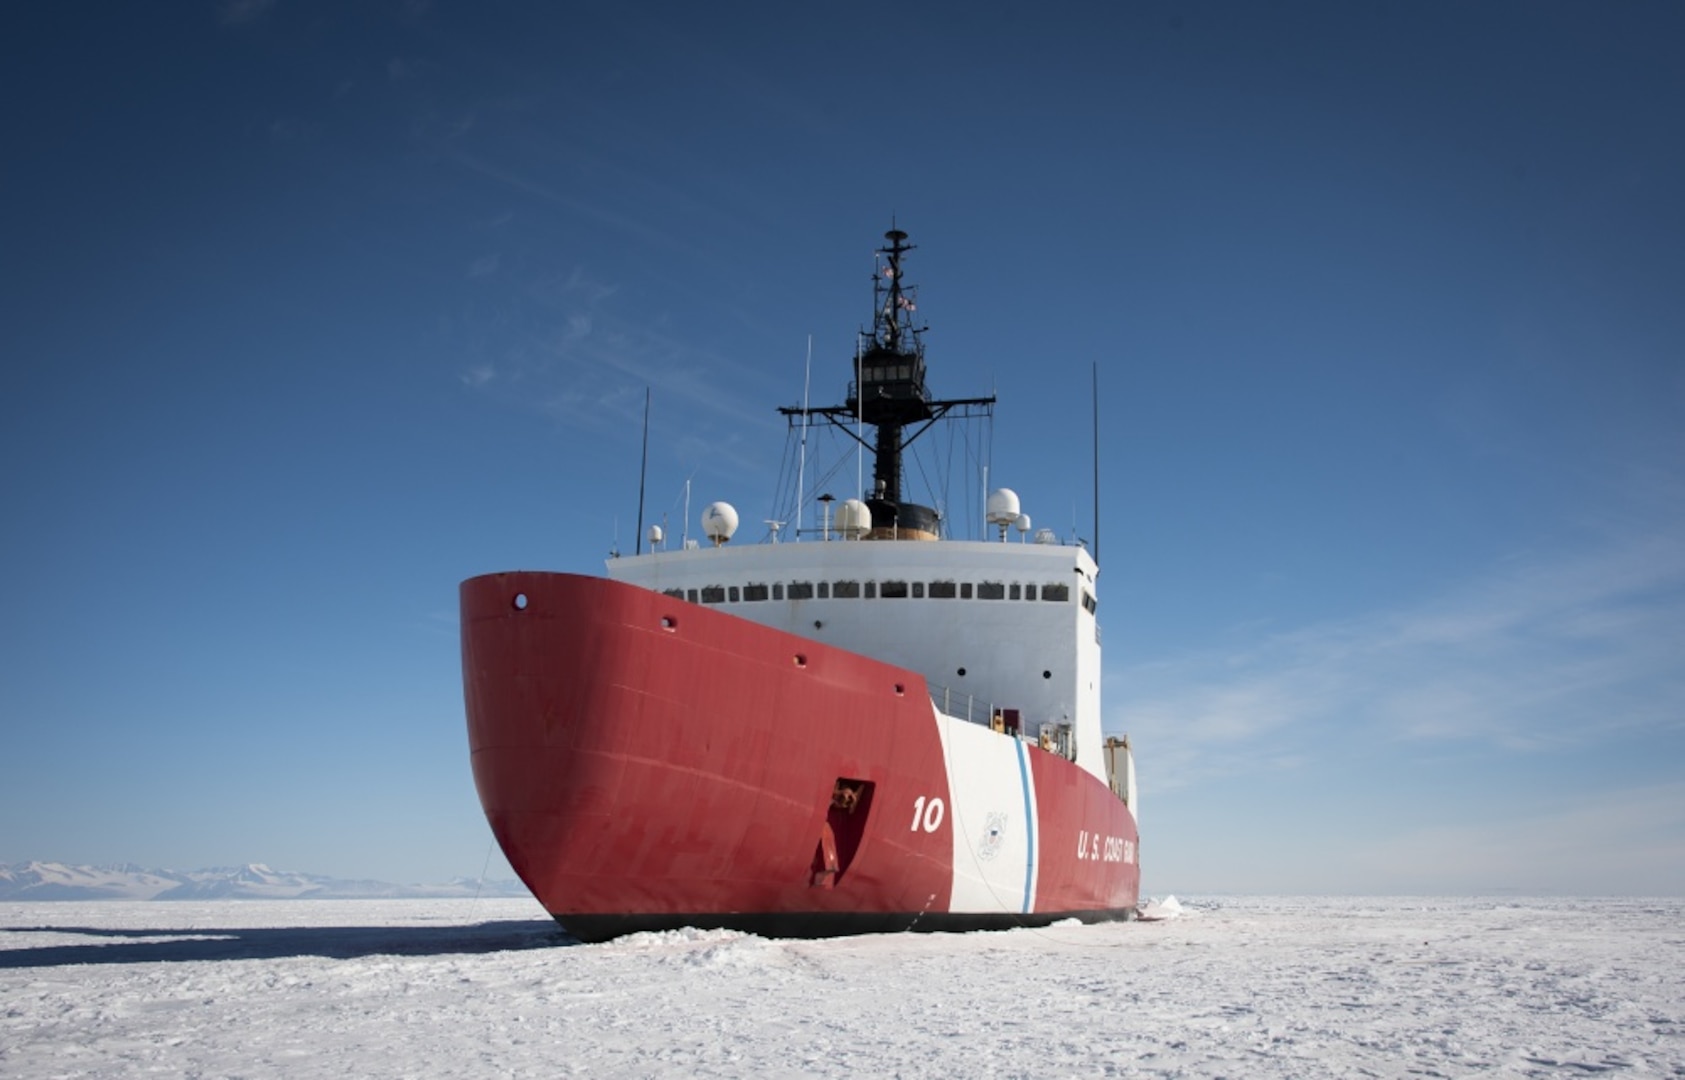 The Coast Guard Cutter Polar Star (WAGB-10) is in the fast Ice Jan. 2, 2020, approximately 20 miles north of McMurdo Station, Antarctica. The 399-foot icebreaker is the only ship in U.S. service capable of clearing a path through the Antarctic ice to escort three refuel and resupply ships to McMurdo Station during Operation Deep Freeze. The ships deliver enough cargo and fuel to sustain year-round operations on the remote continent. U.S. Coast Guard photograph by Senior Chief Petty Officer NyxoLyno Cangemi